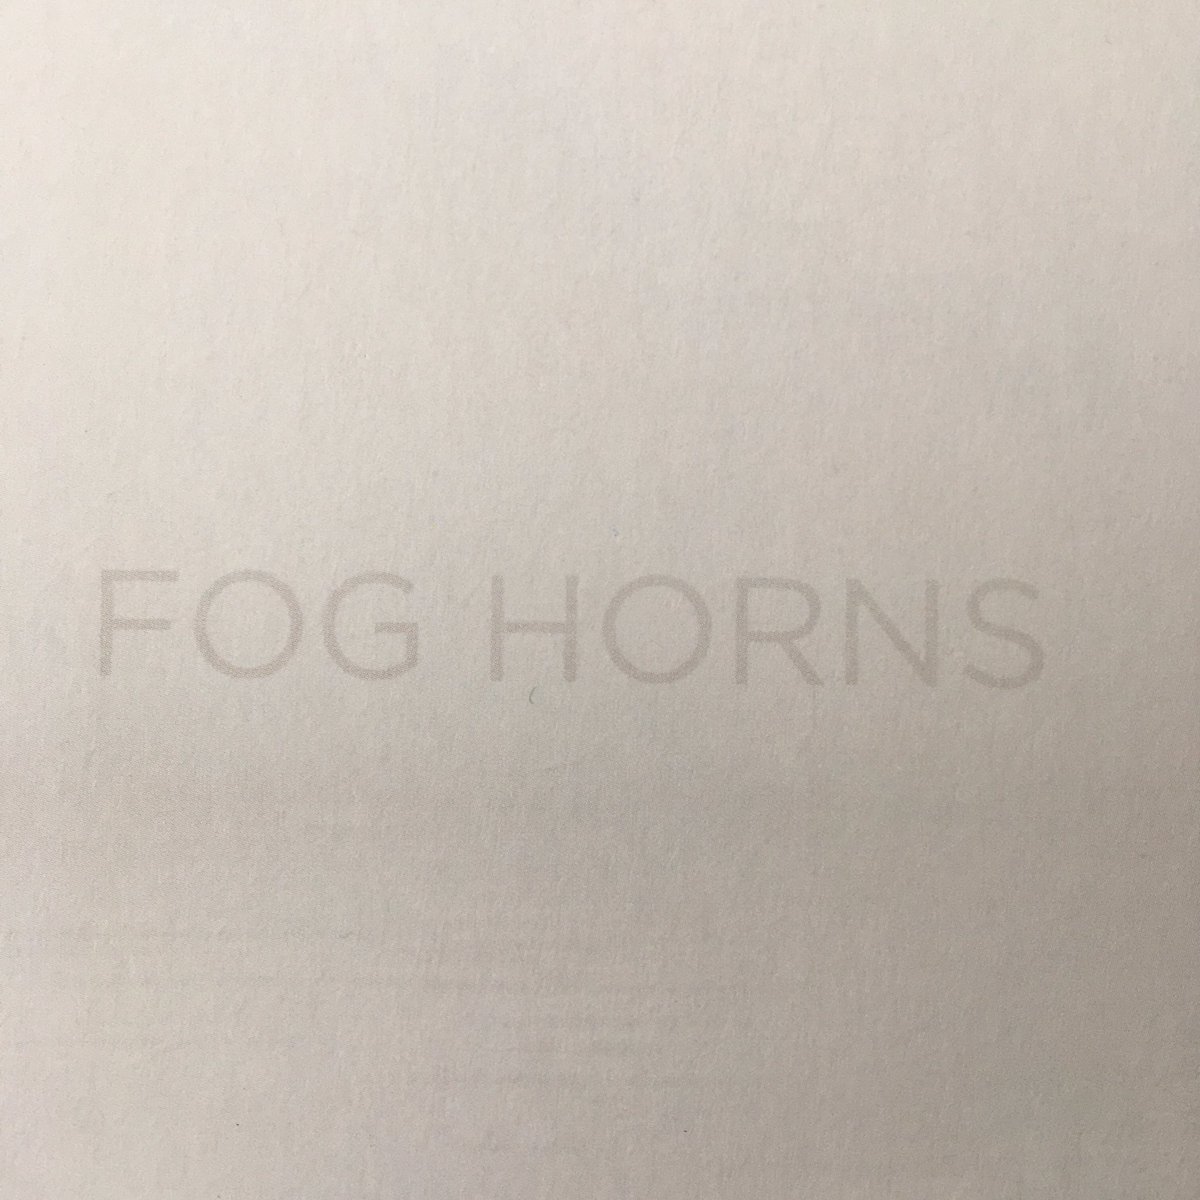 Now playing while working at home: Fog Horns, #vinyl album by @felixblume #fieldrecordings #ambient #soundart